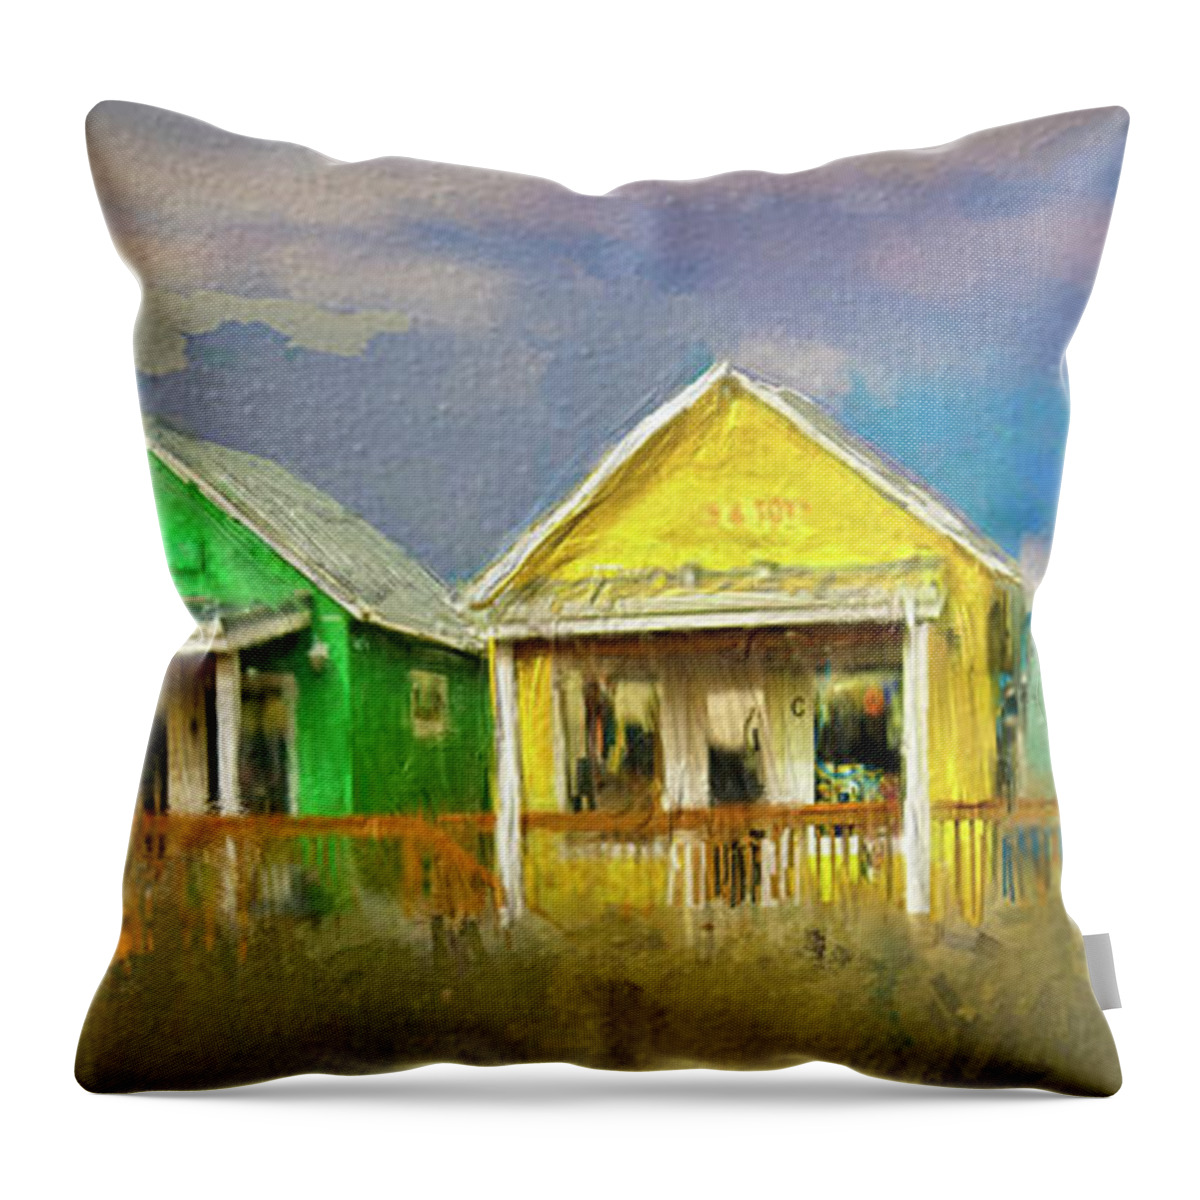 Cabins Throw Pillow featuring the digital art 4 Of A Kind by Dale Stillman